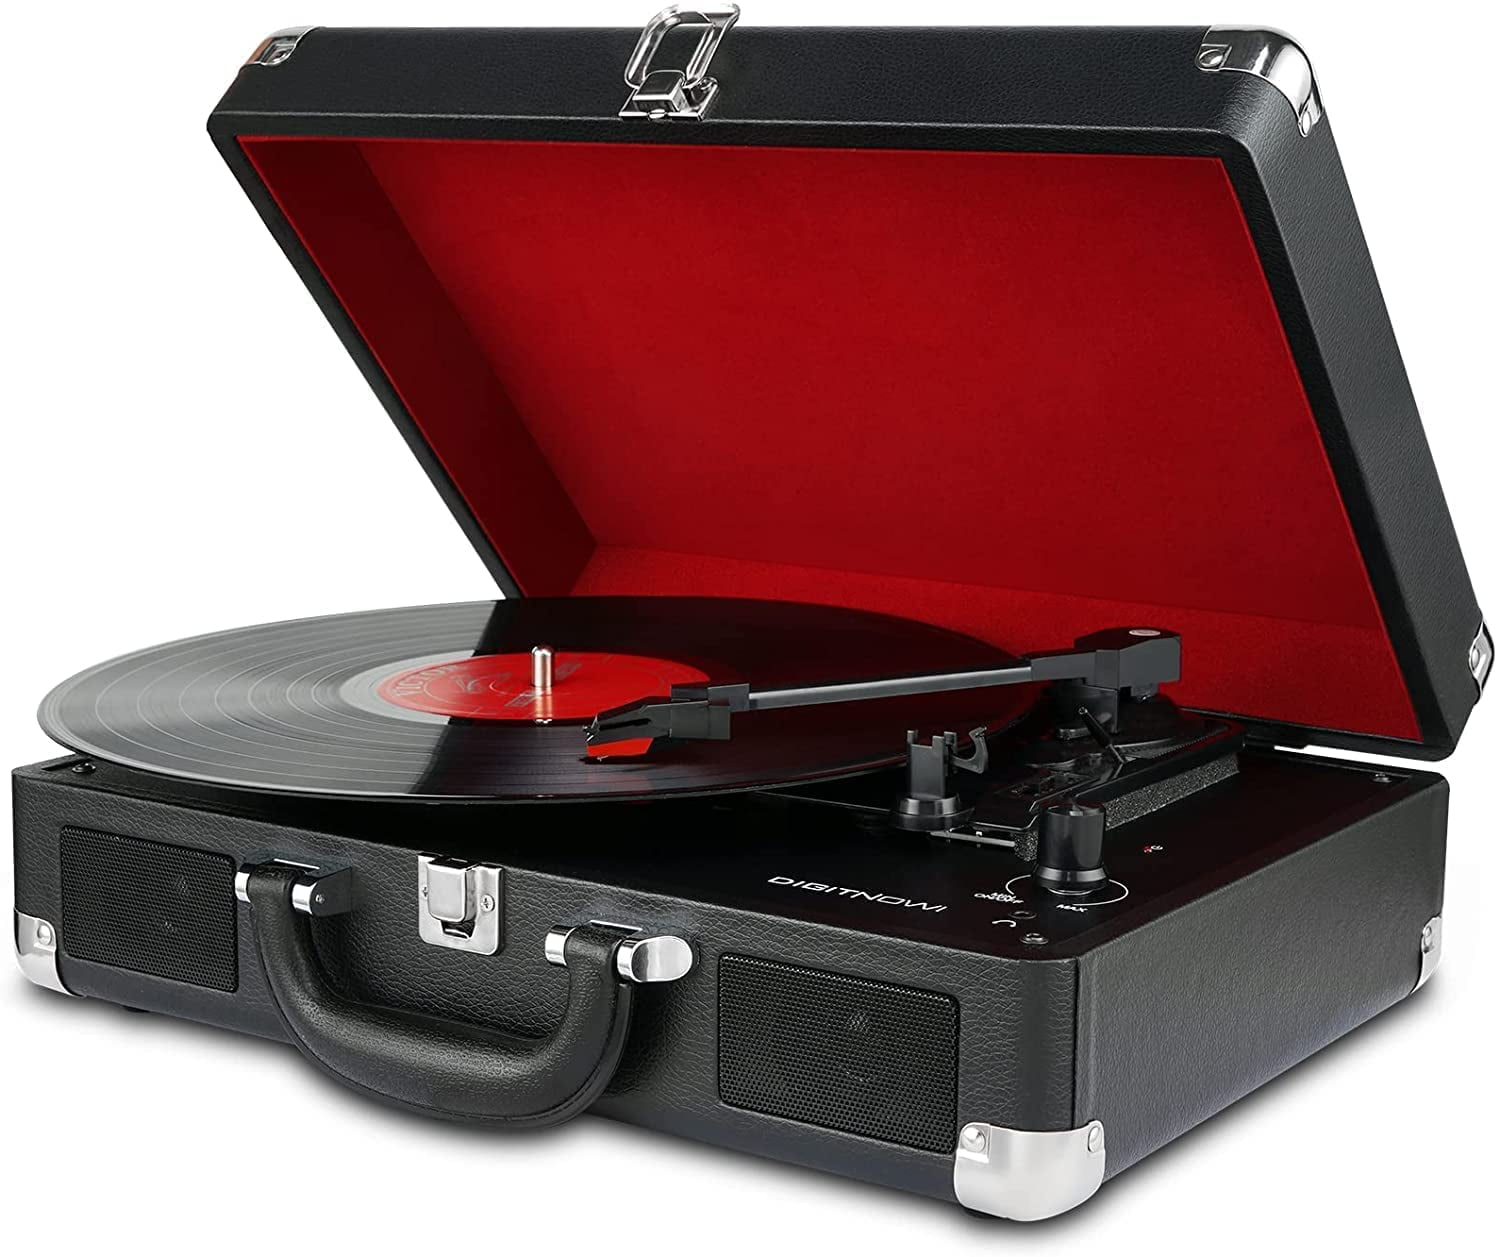 DIGITNOW Turntable Record Player 3 Speeds with Built-in Stereo Speakers  (Black)